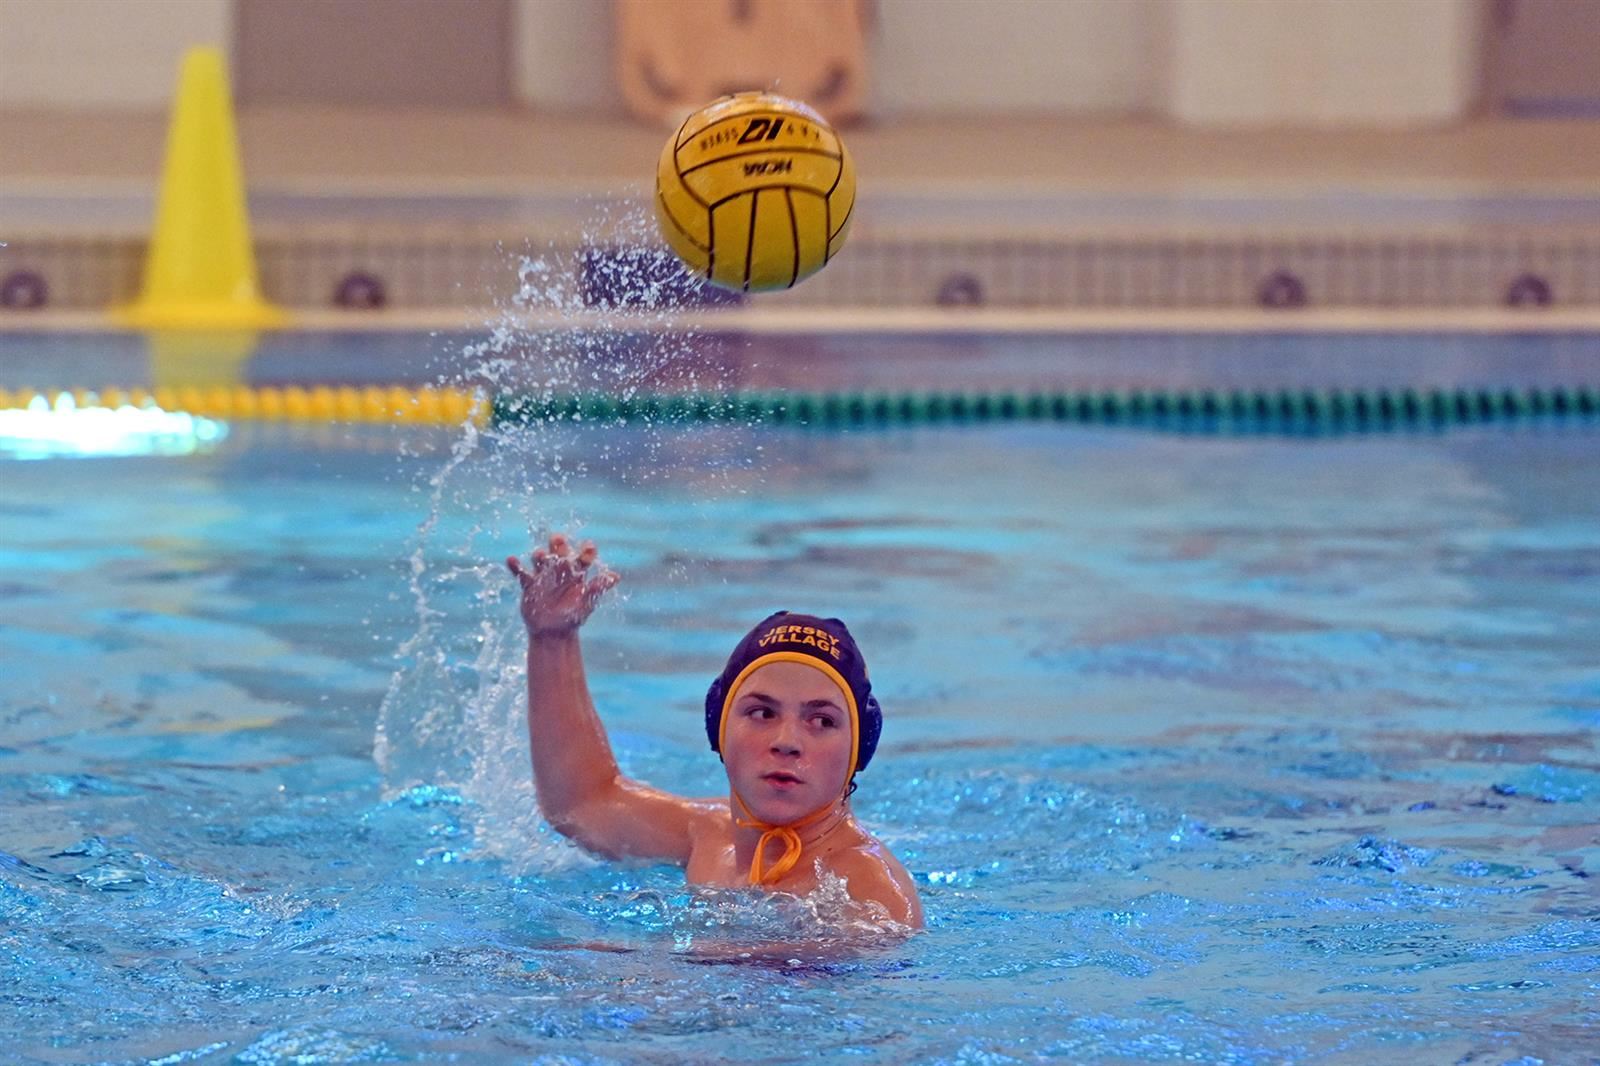 The Jersey Village High School boys’ water polo team defeated Fort Bend Clements, 20-7.